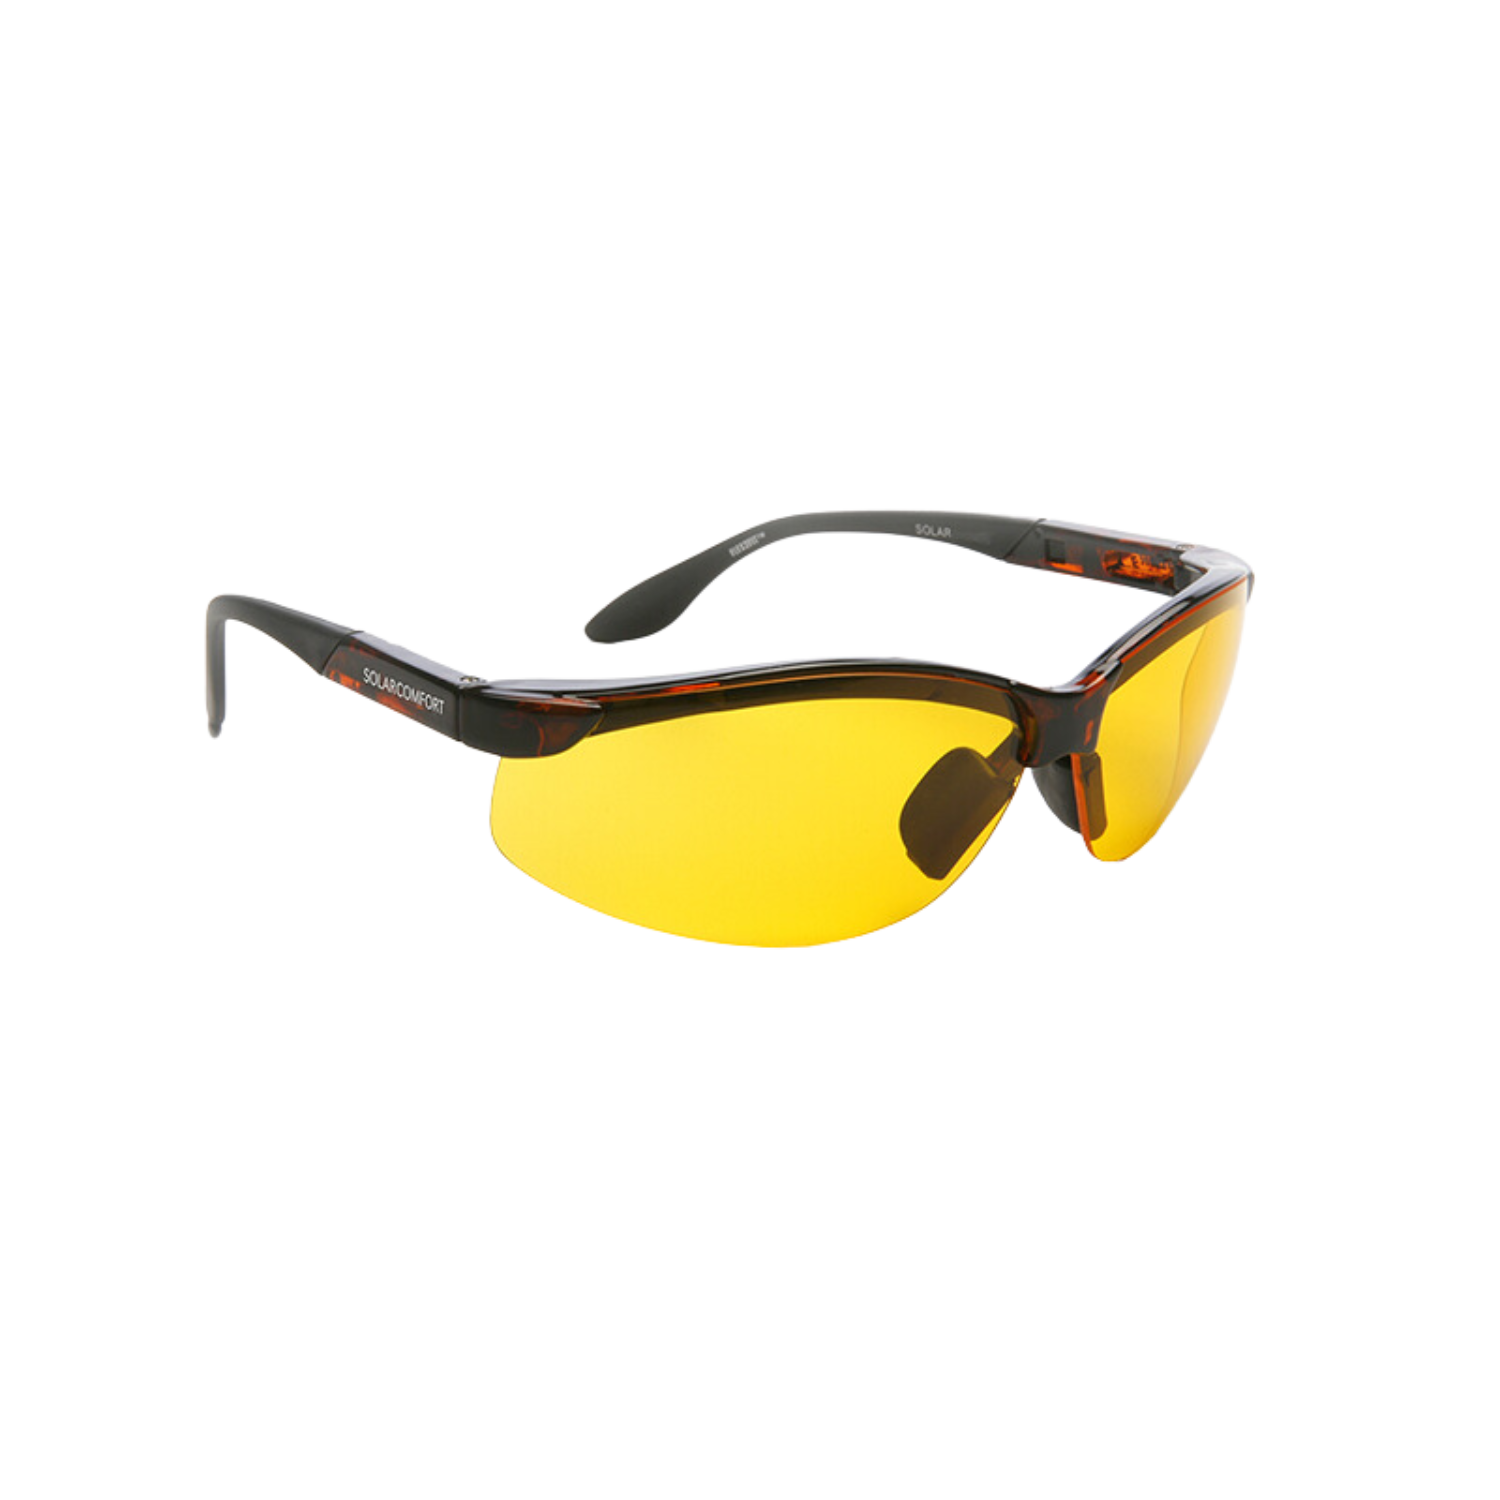 Image of the SolarComfort® Blue Light Glasses with Yellow Tint from Eschenbach.